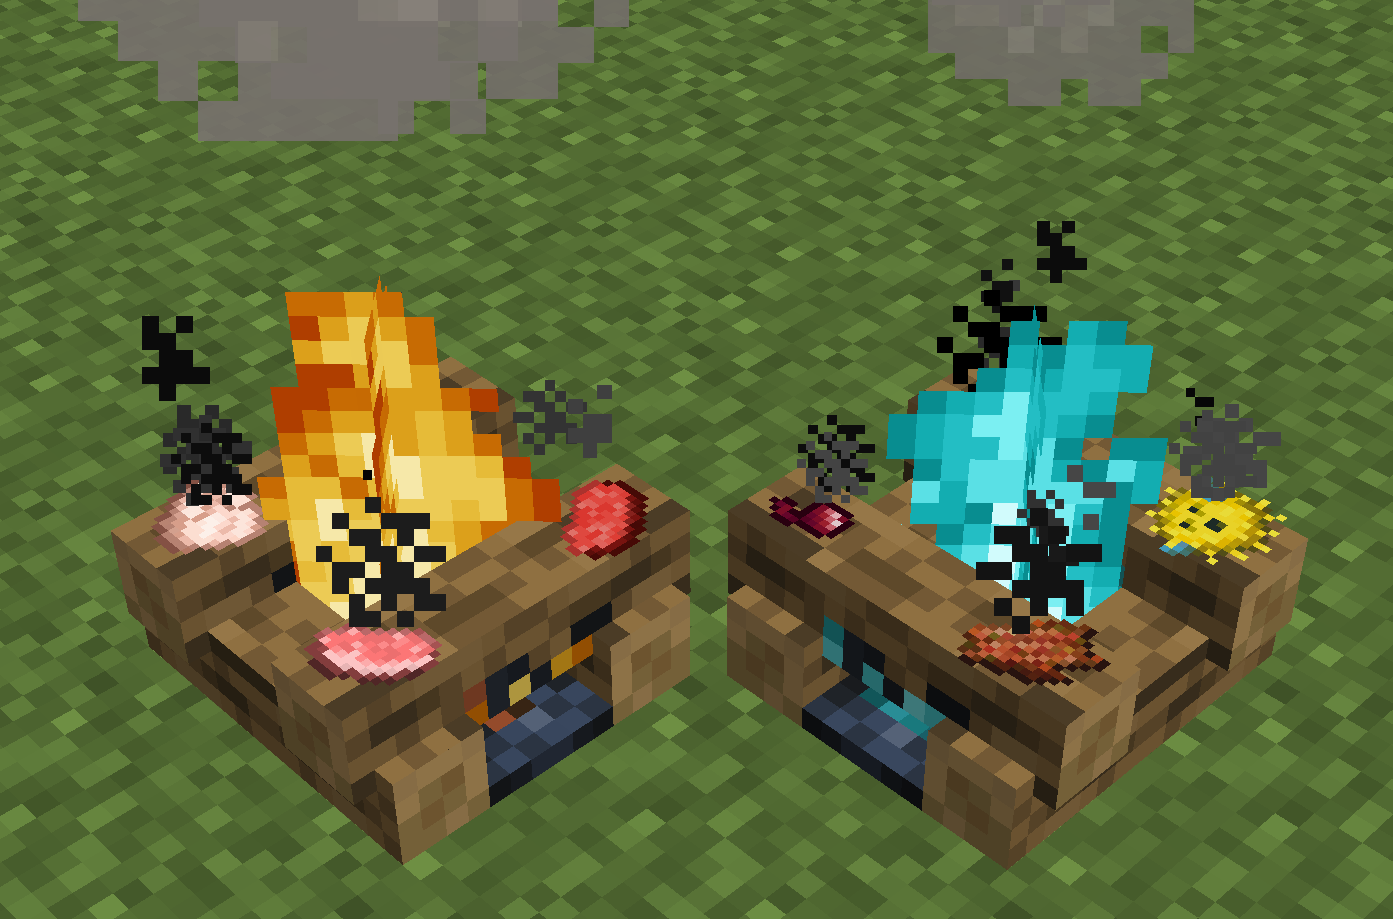 Regular and Soul campfires cooking items